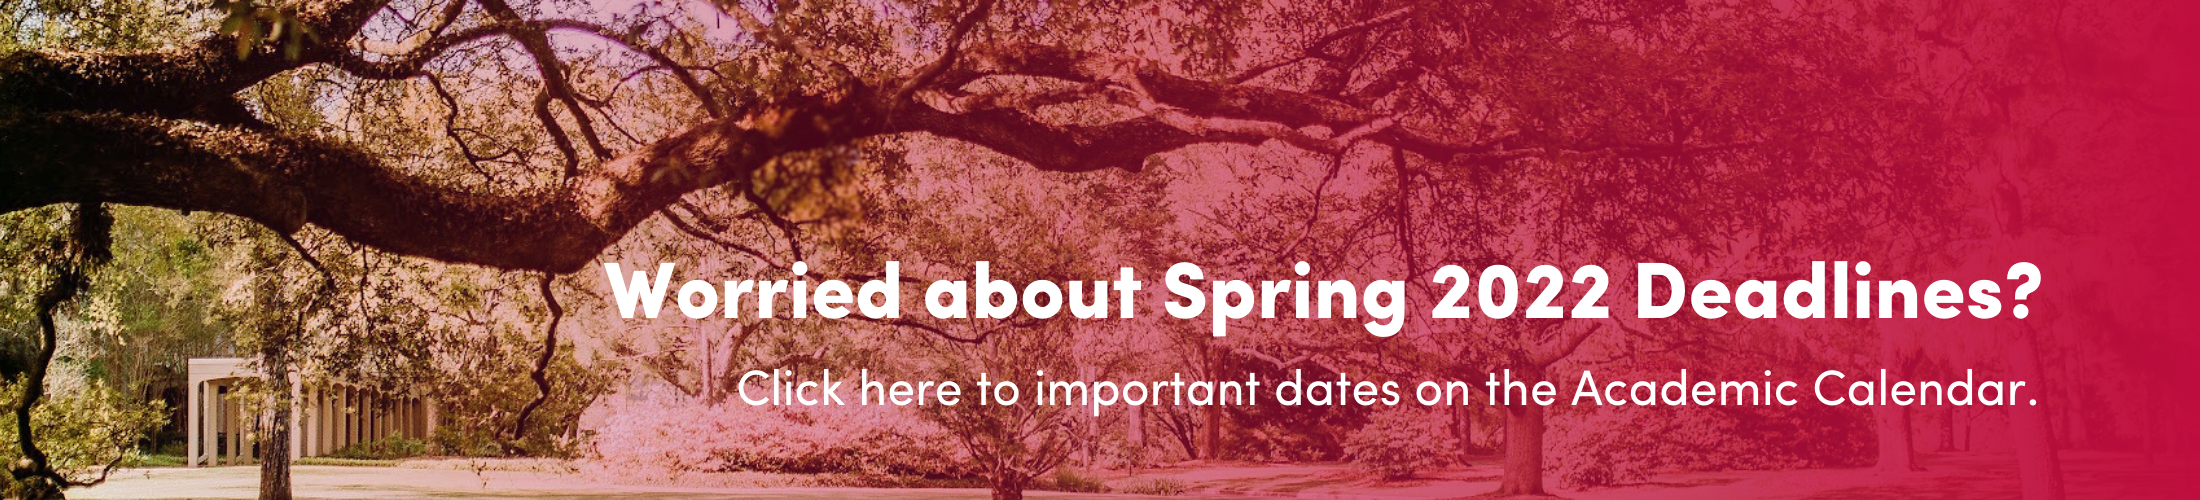 Worried about Spring 2022 Deadlines? Click here to important dates on the Academic Calendar.